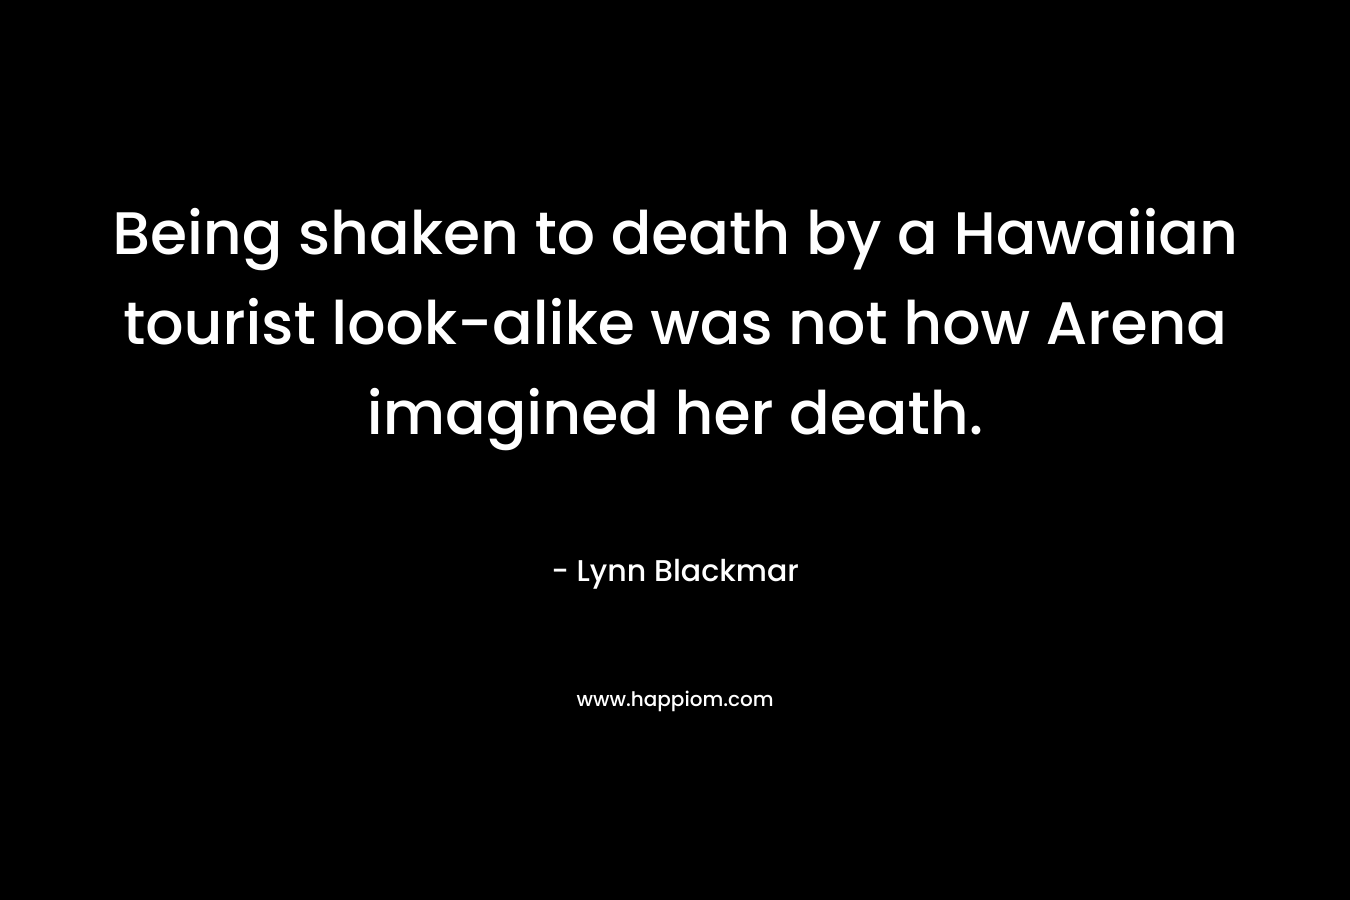 Being shaken to death by a Hawaiian tourist look-alike was not how Arena imagined her death. – Lynn Blackmar